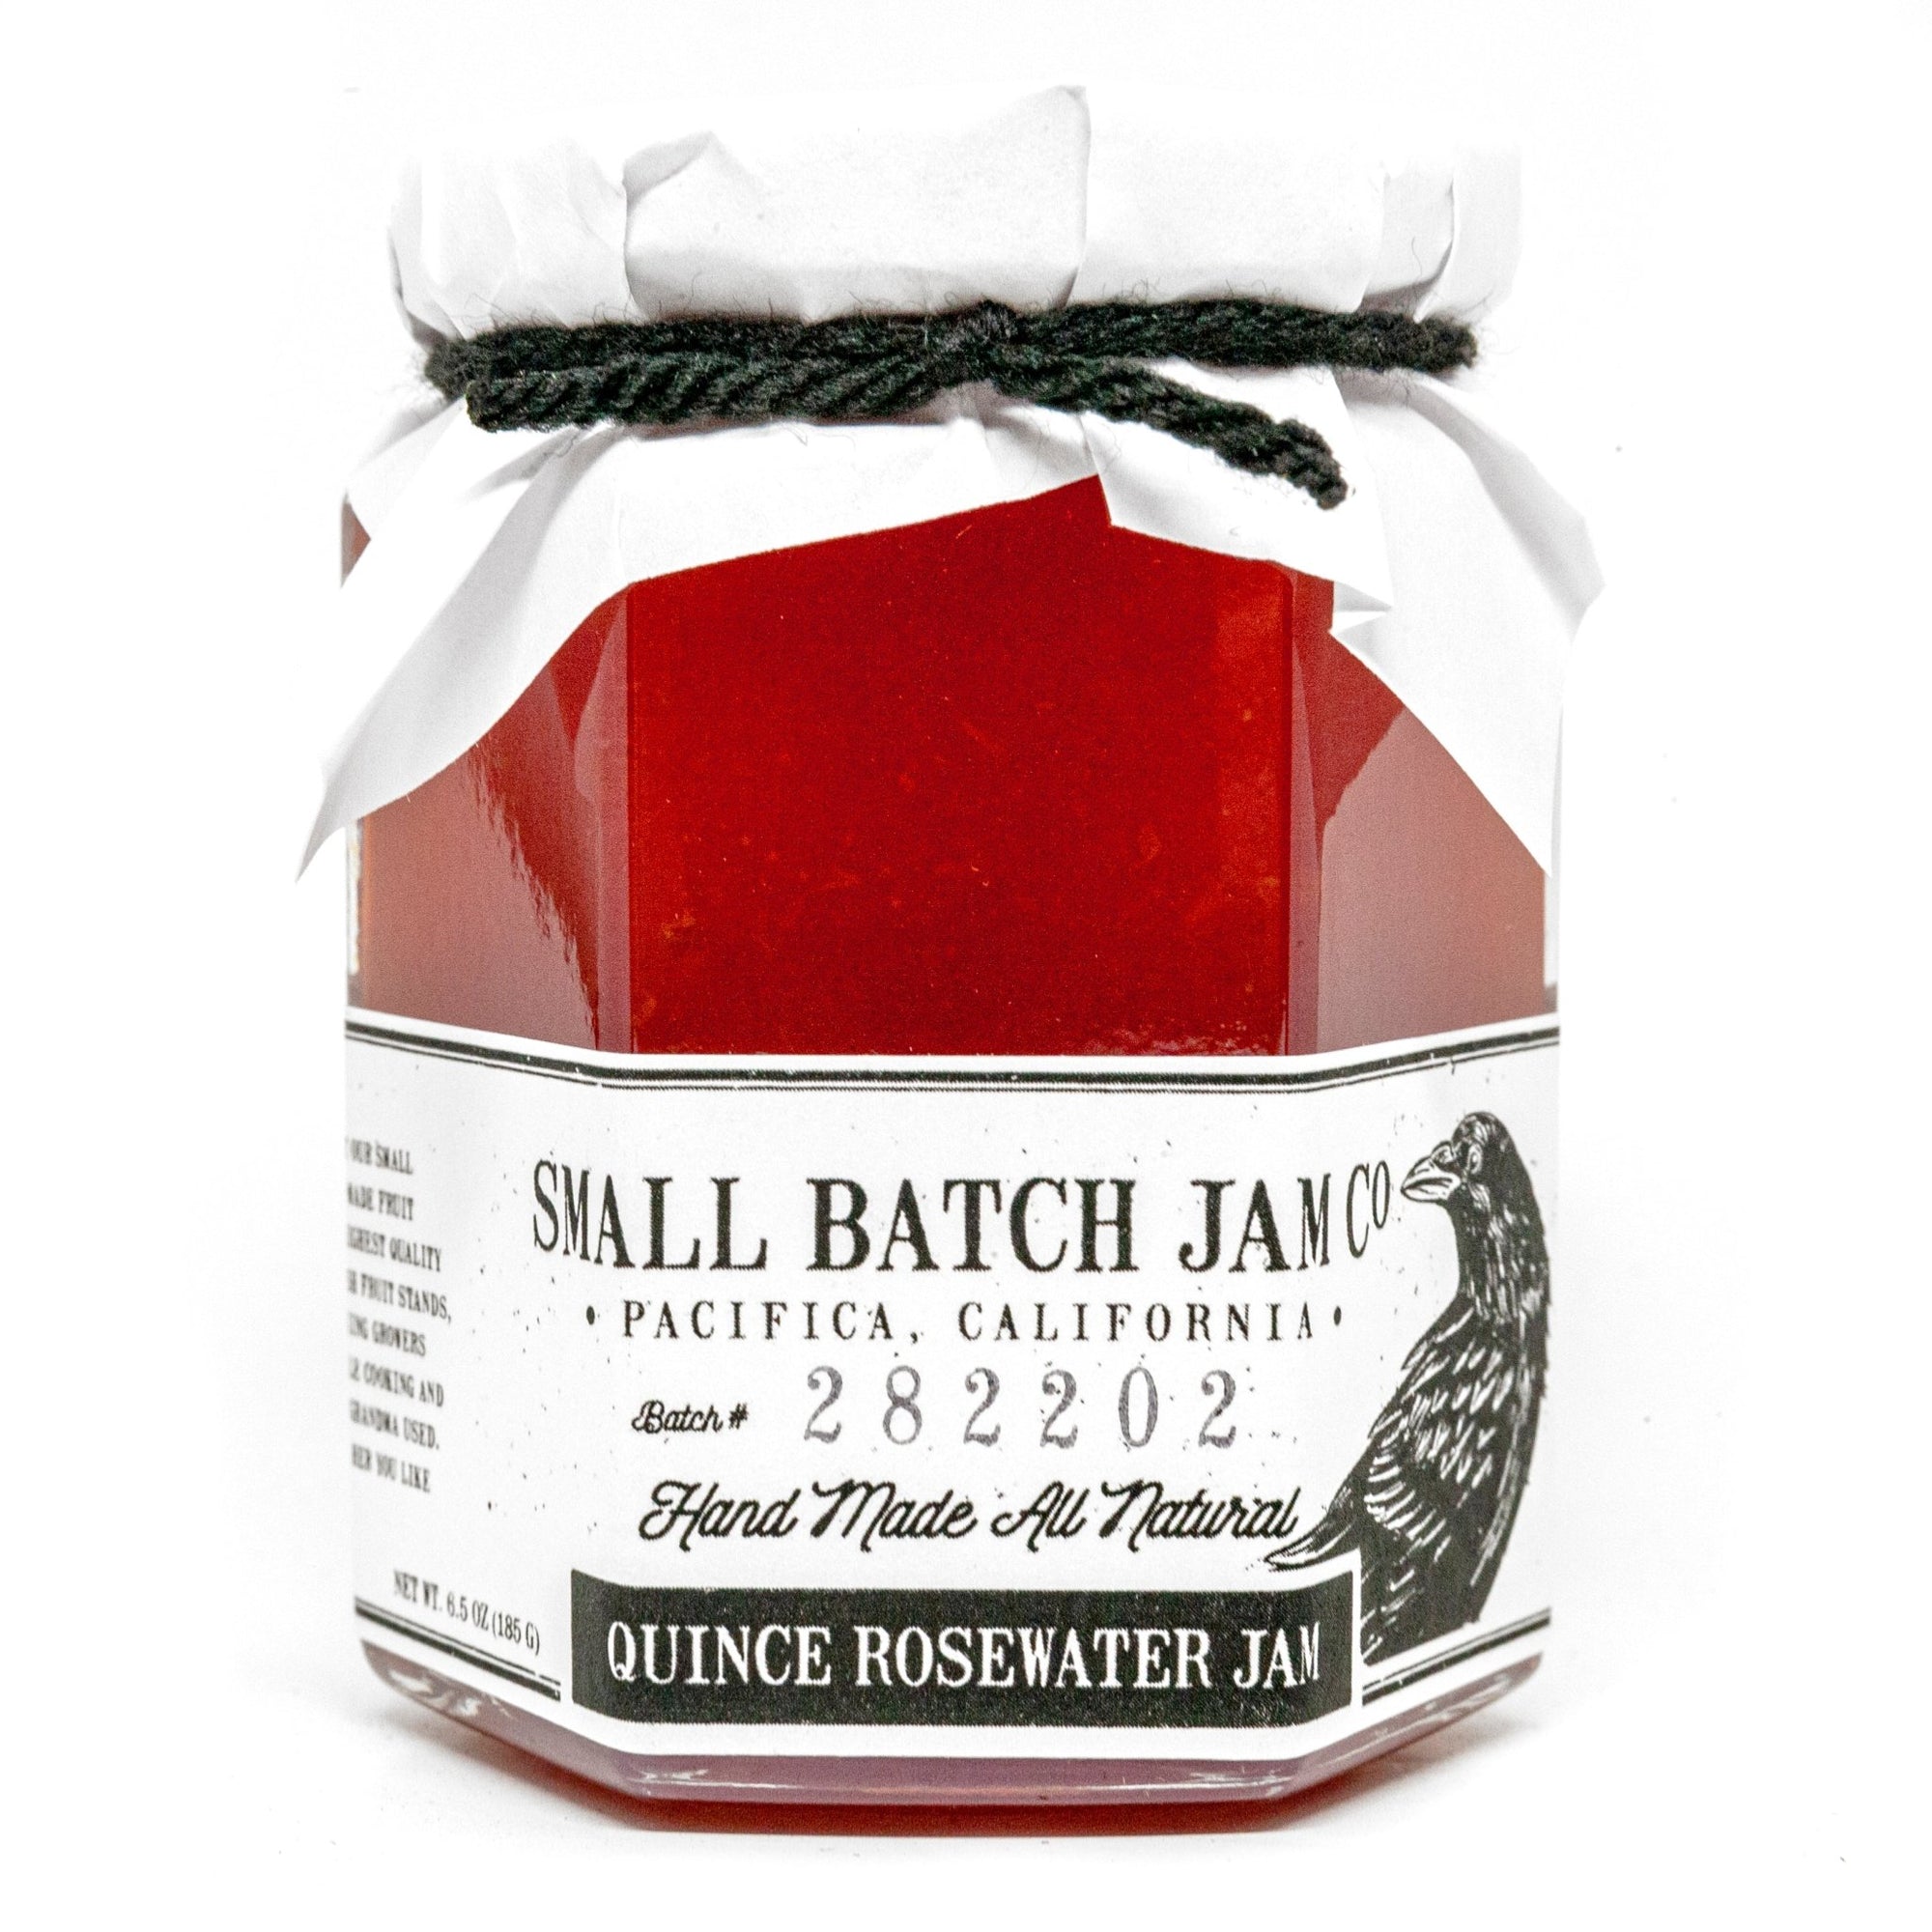 Quince Rosewater Jam - Small Batch Jam Co